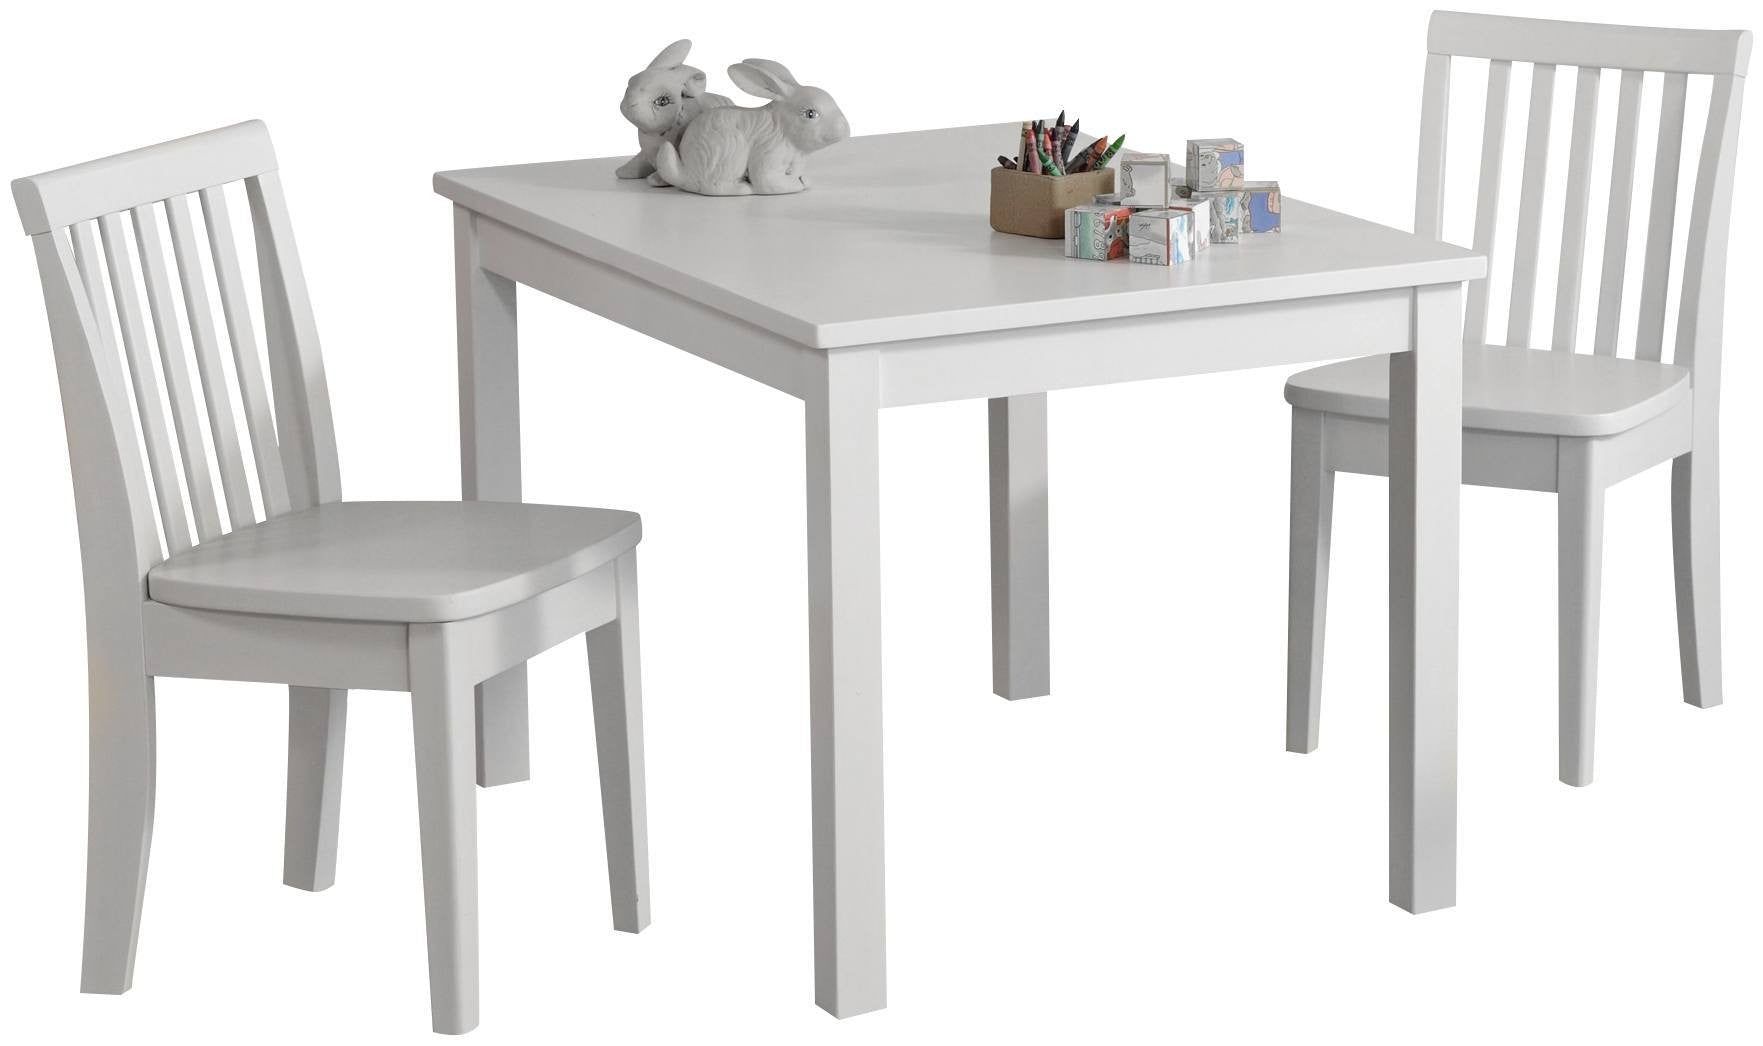 [32 Inch] Kid's Tables